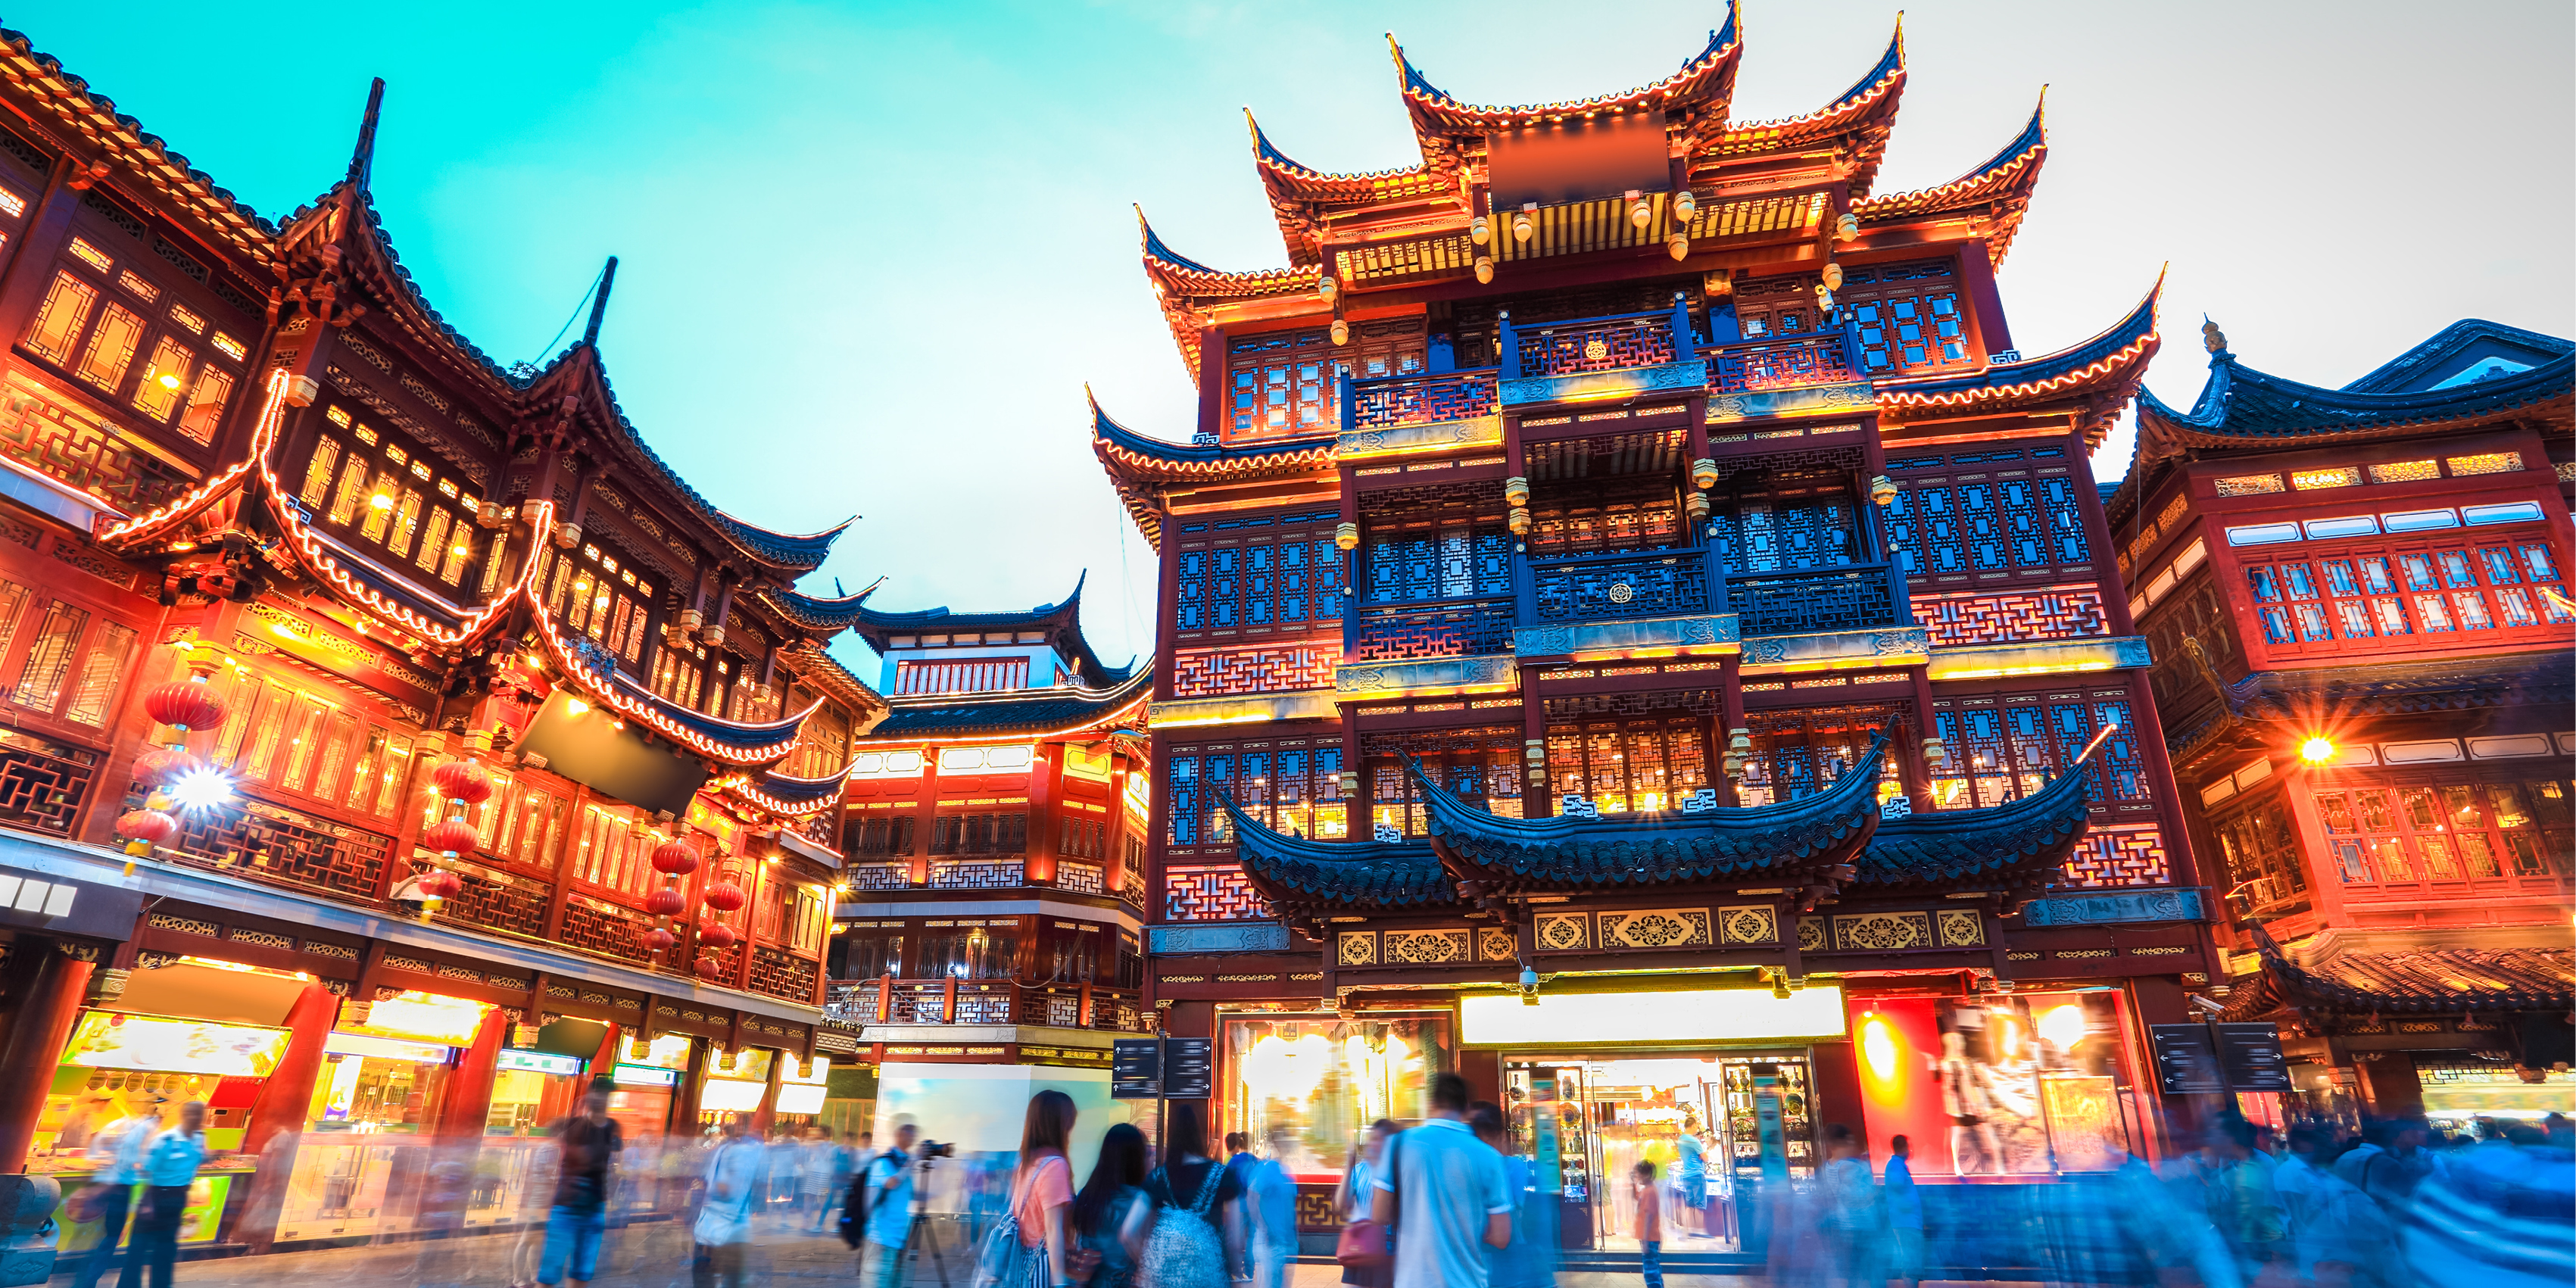 Chinese temples in Yuyuan Gardens, Shanghai lit up at night